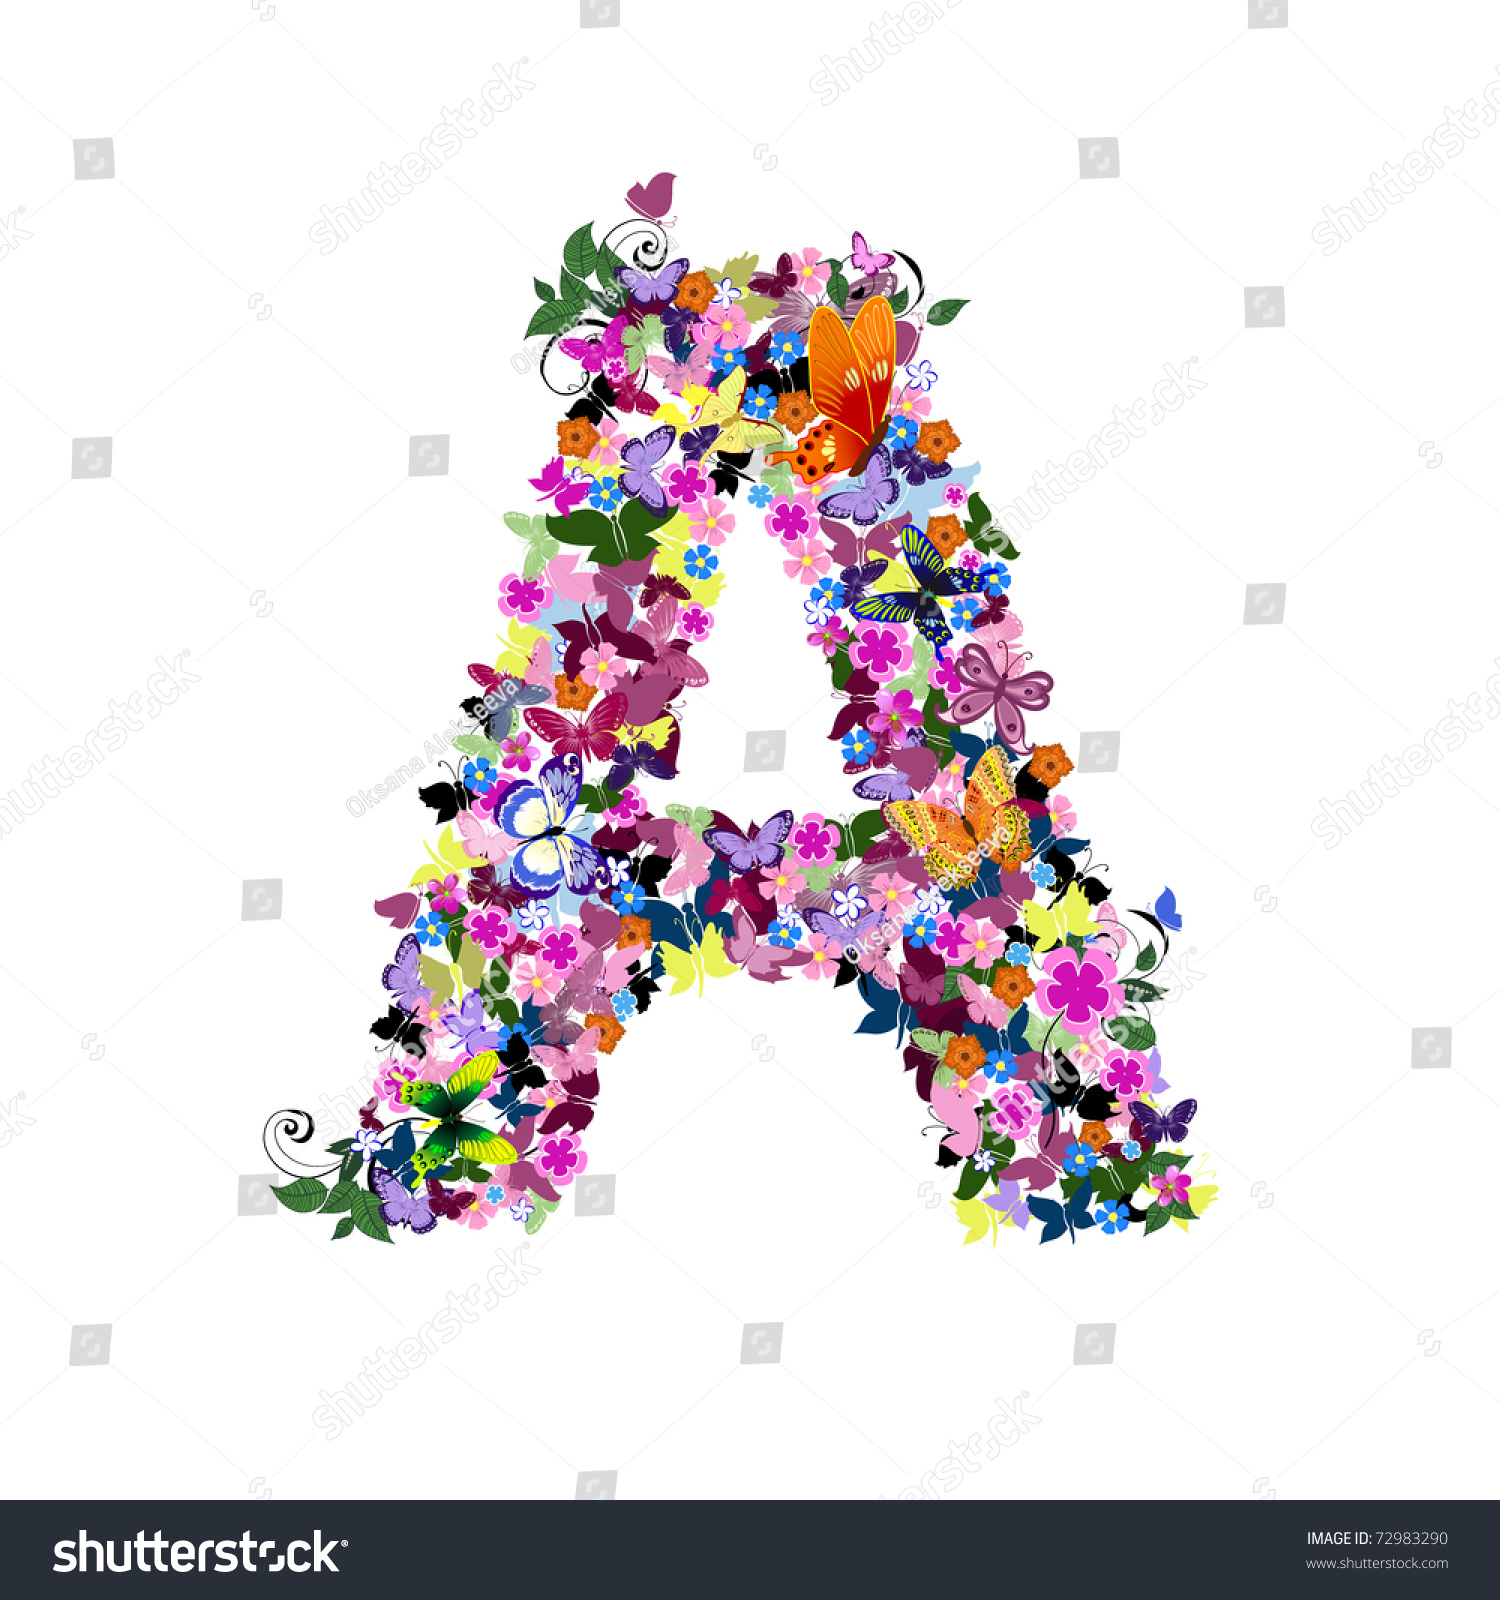 Pattern Letter Of Butterflies And Flowers Stock Vector Illustration ...